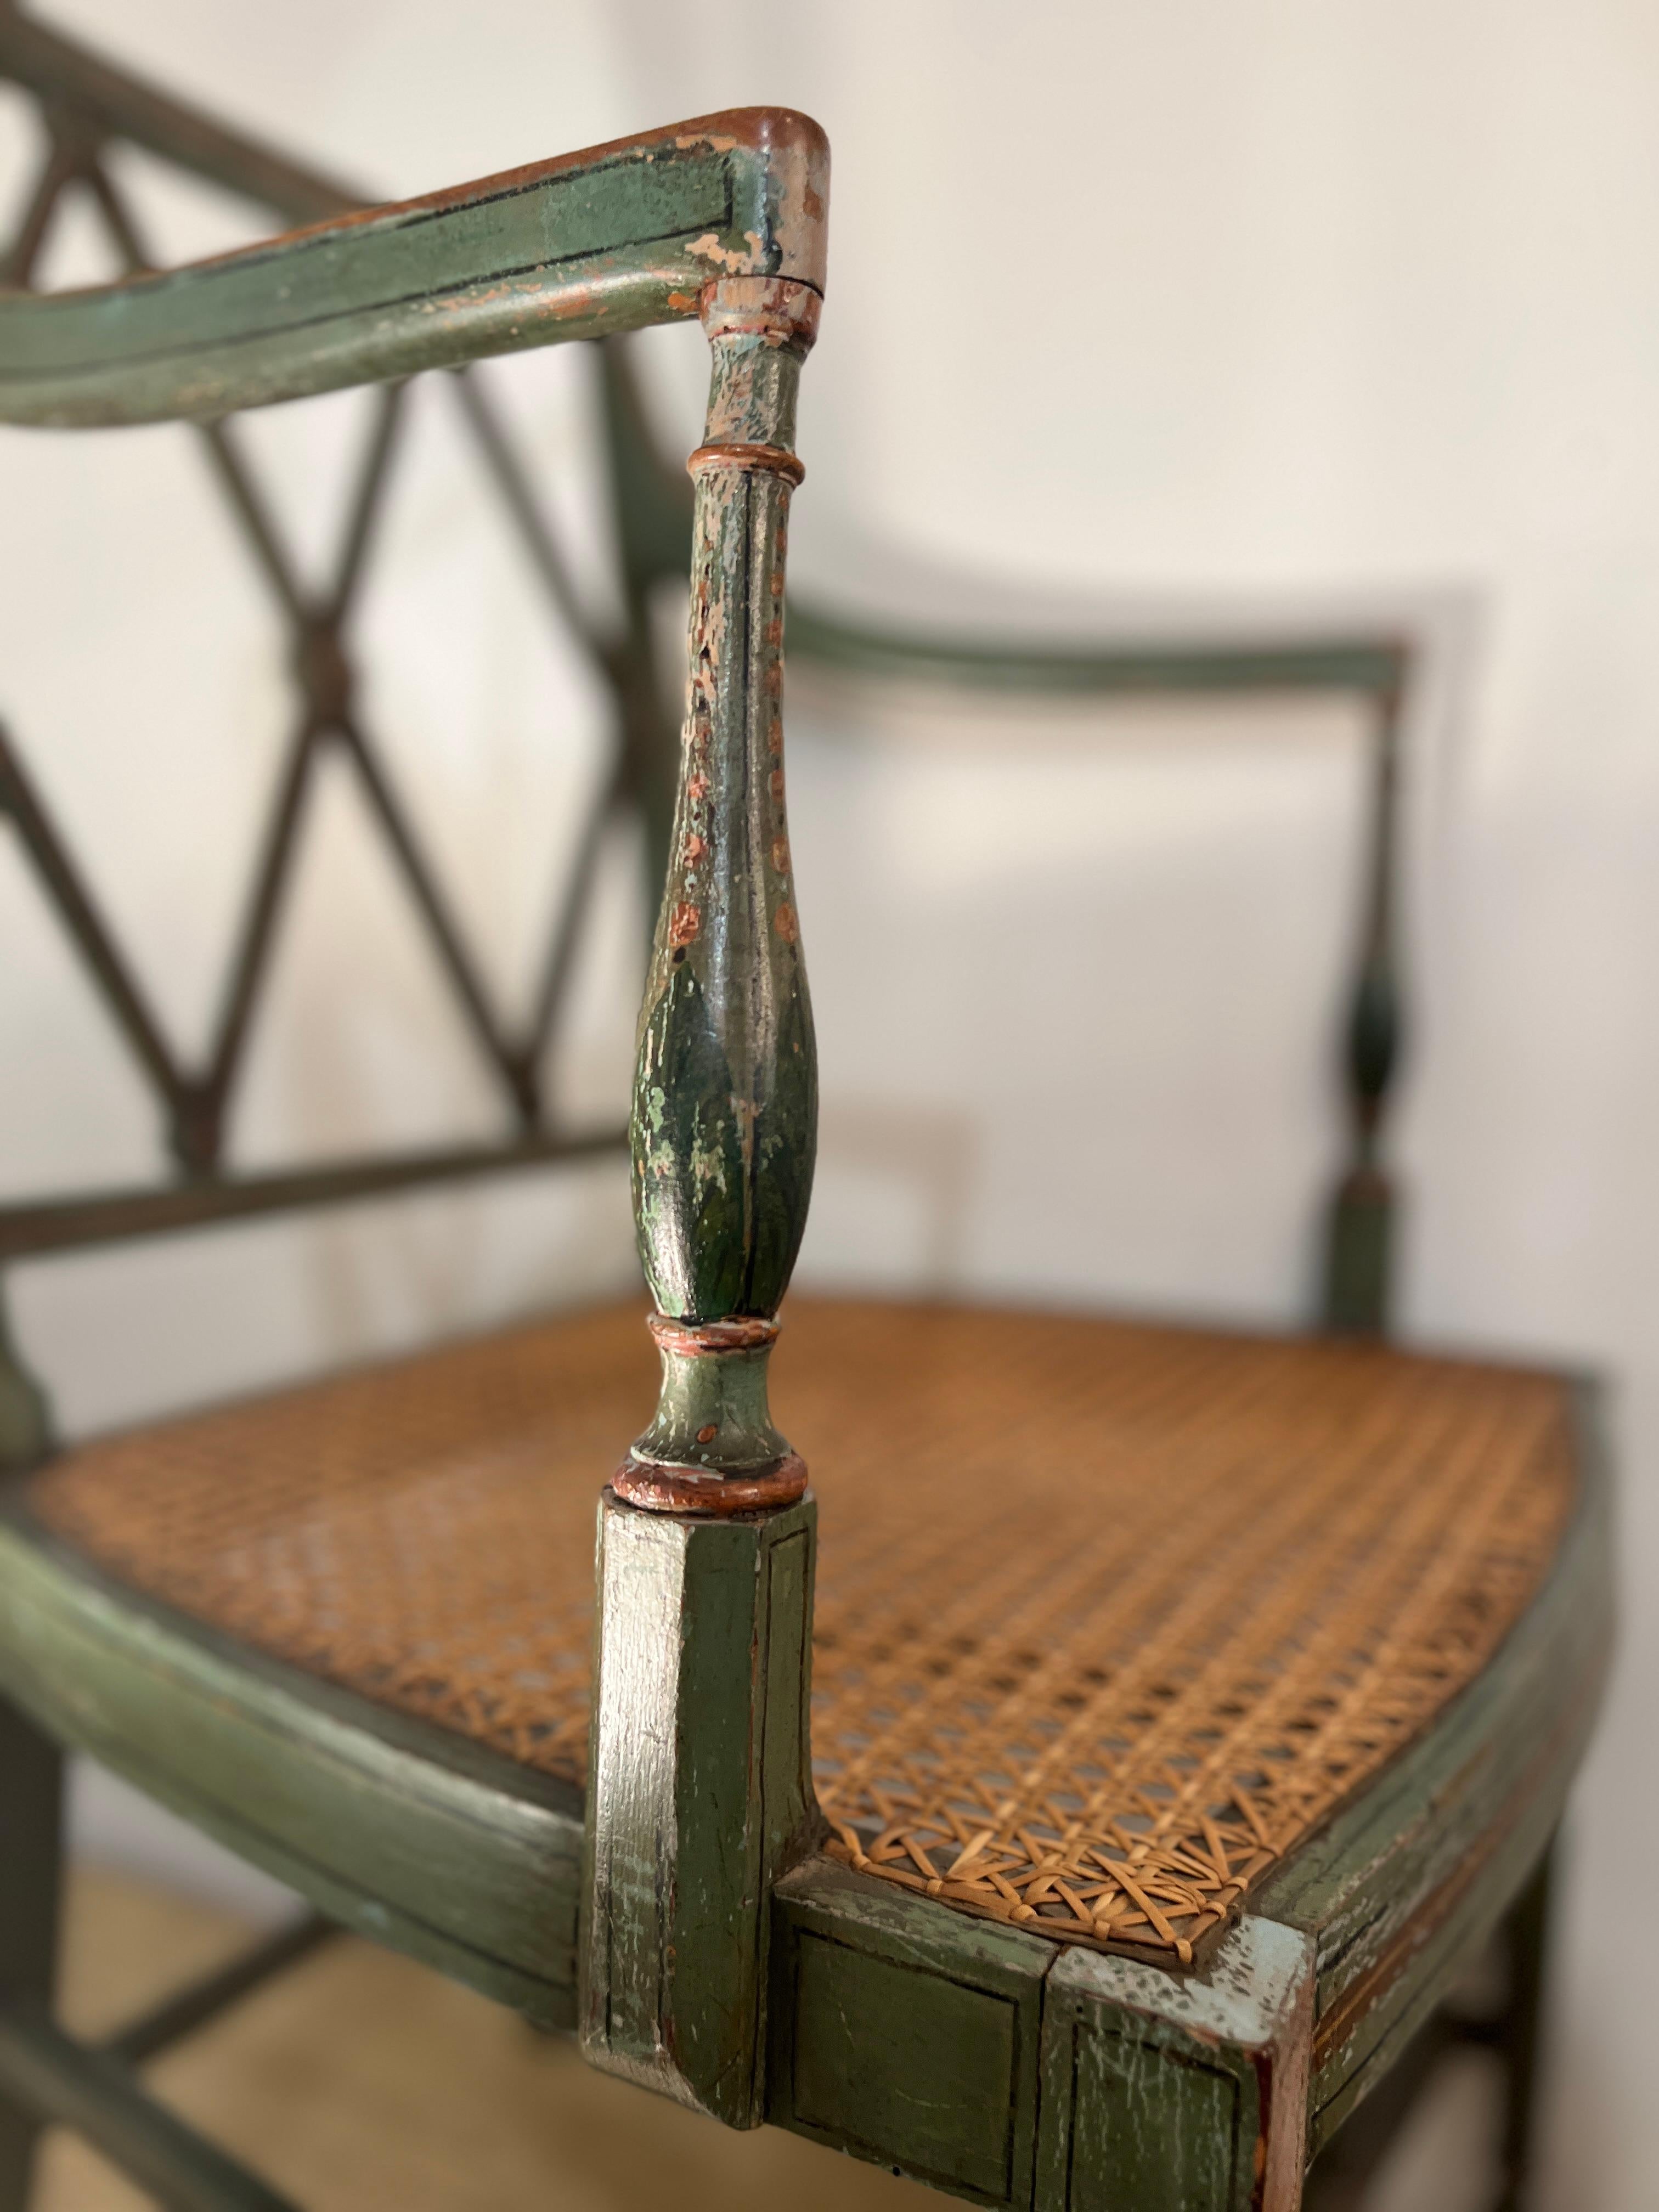 Original paint in a lovely green tone with hand-painted floral details. High arms, an diamond design back and a caned seat.